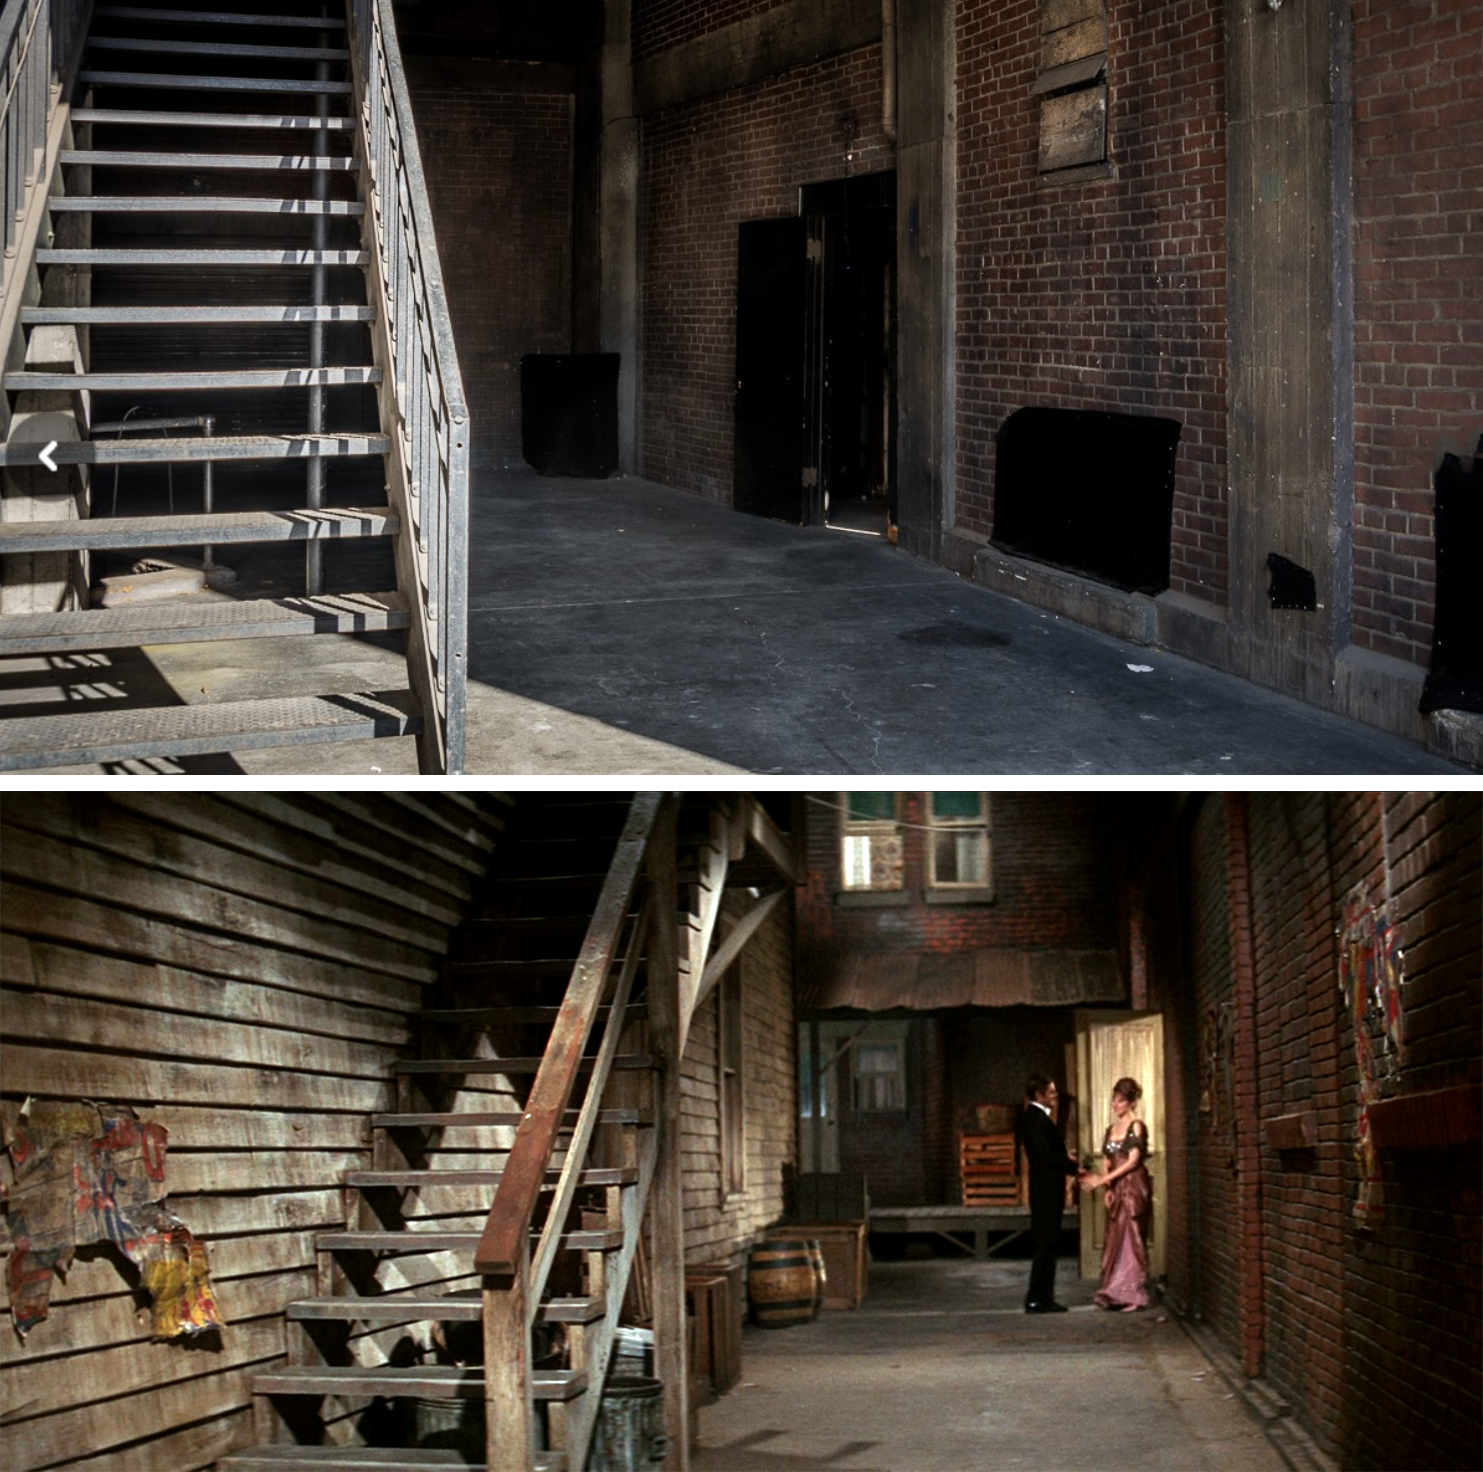 These stairs and this alley on the backlot have seen a lot of action over the years.